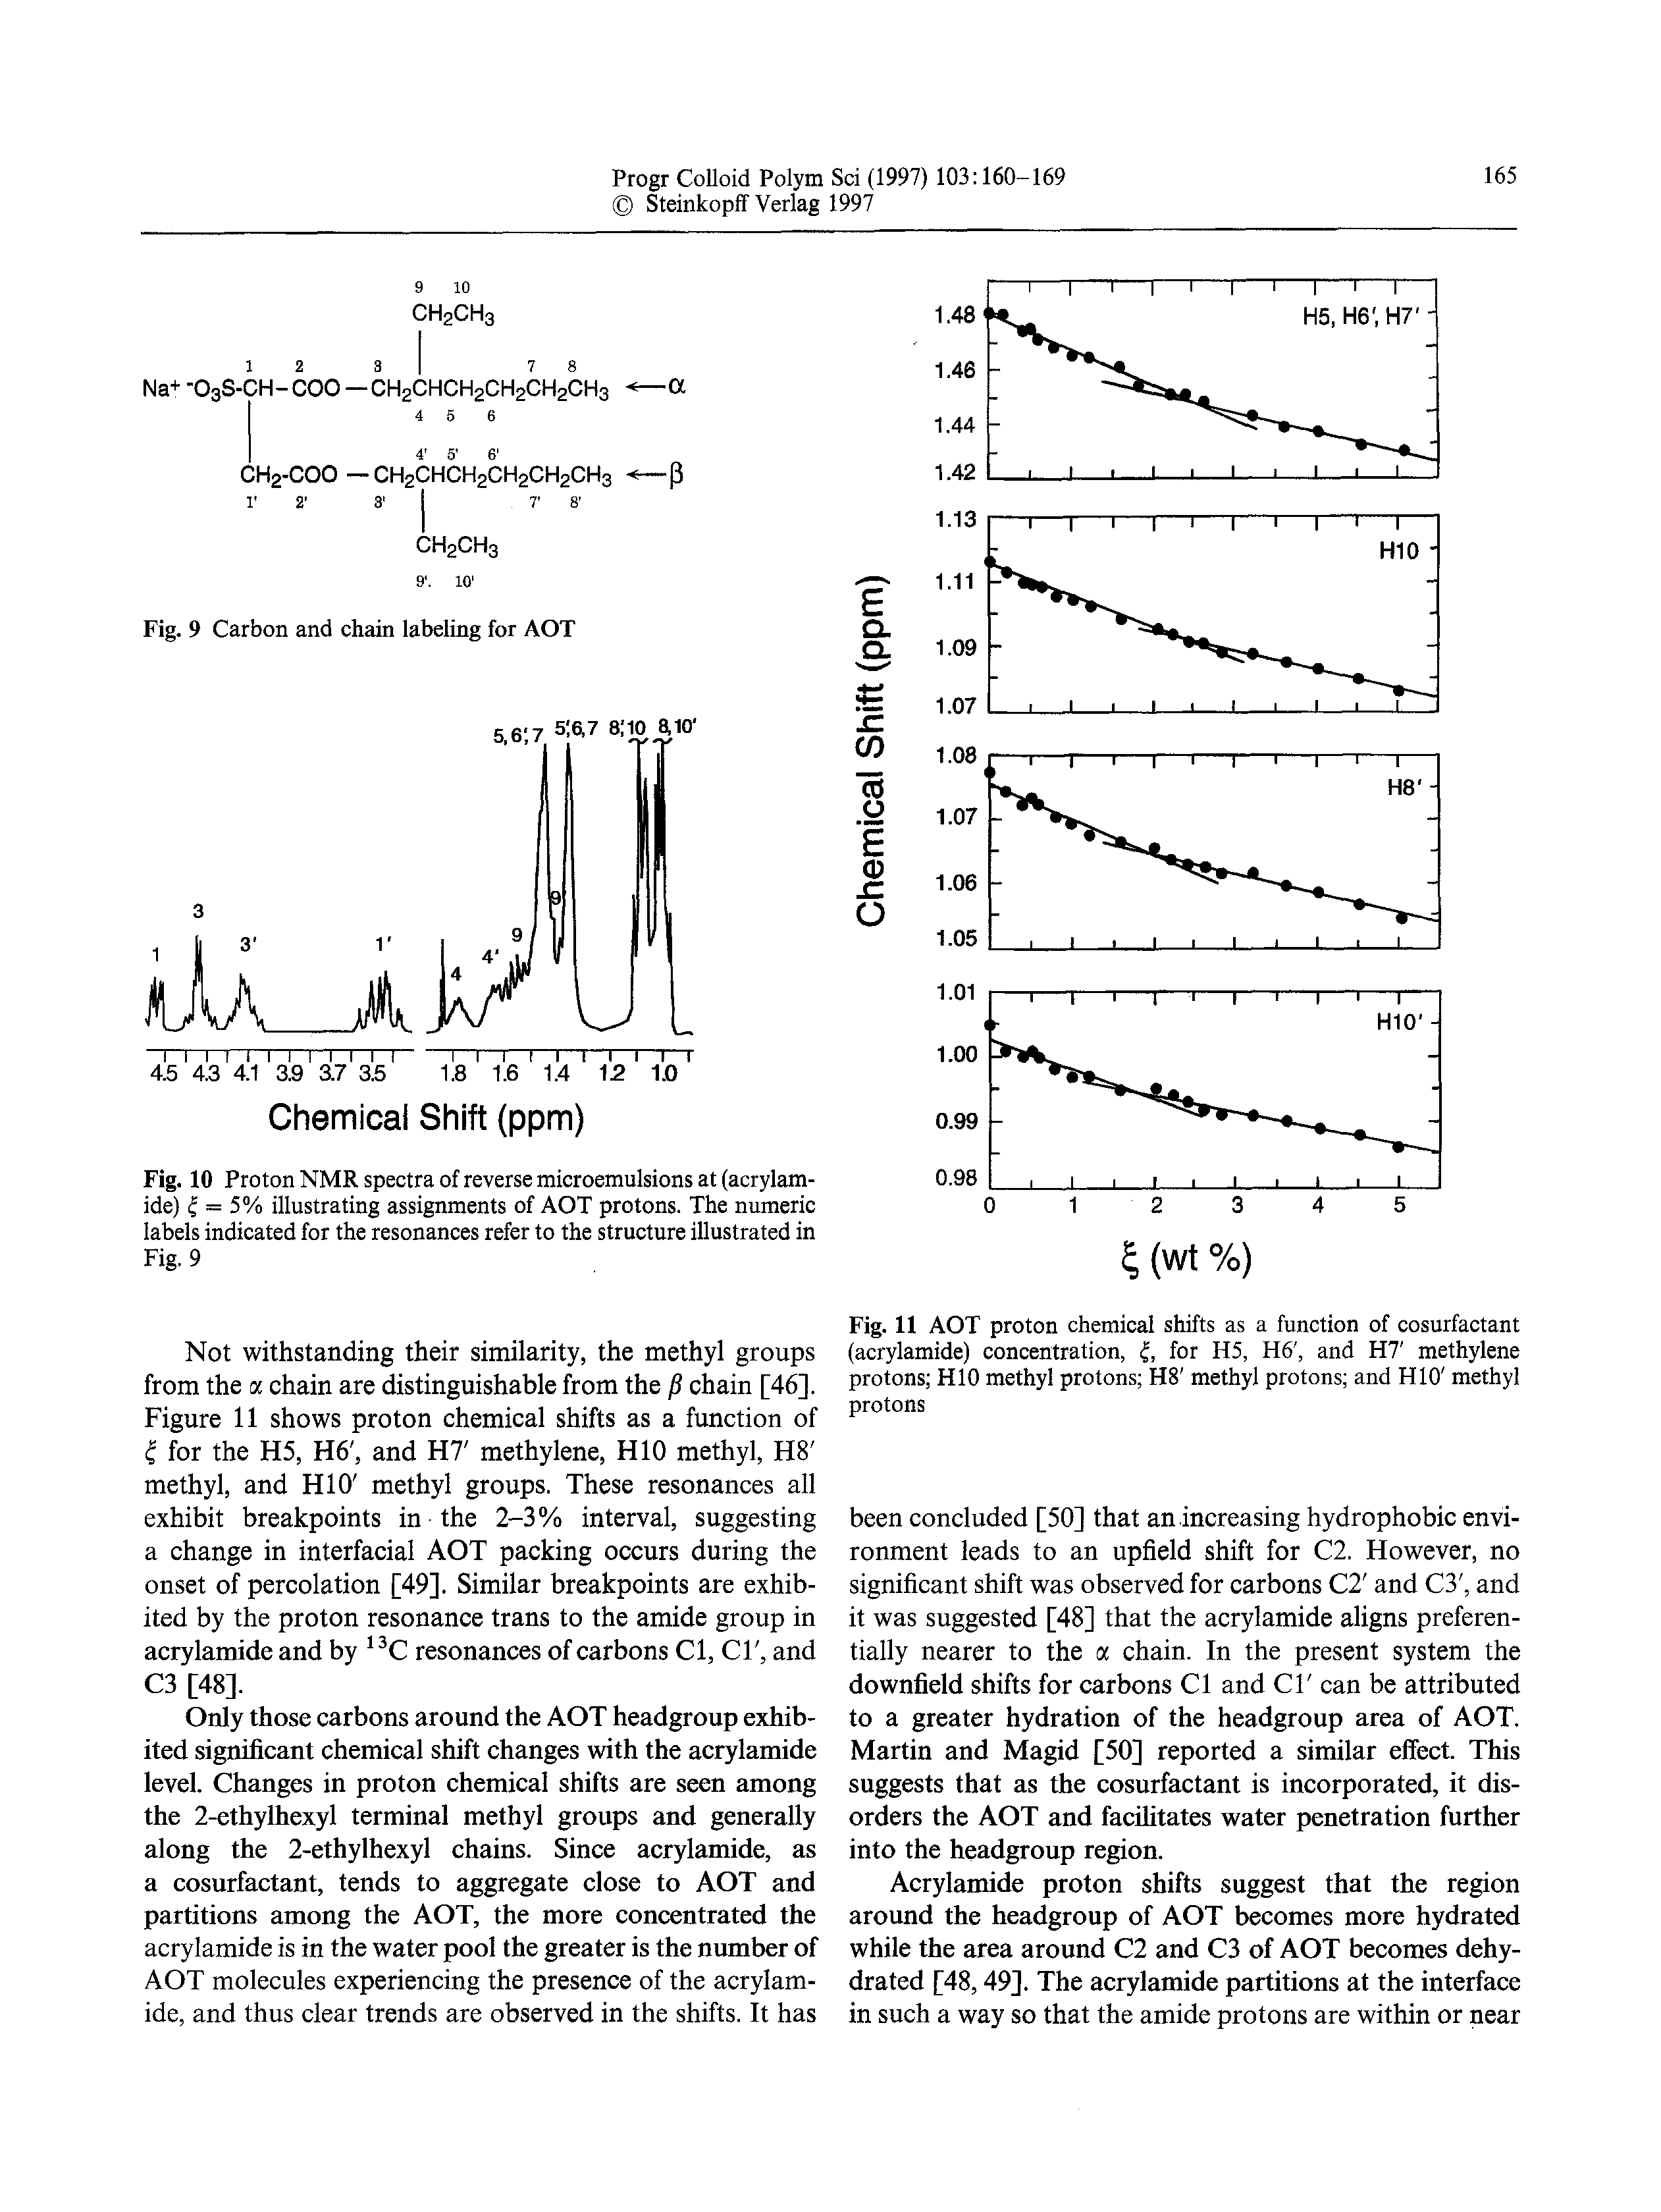 Fig. 11 AOT proton chemical shifts as a function of cosurfactant (acrylamide) concentration, for H5, H6, and H7 methylene protons HIO methyl protons H8 methyl protons and HIO methyl protons...